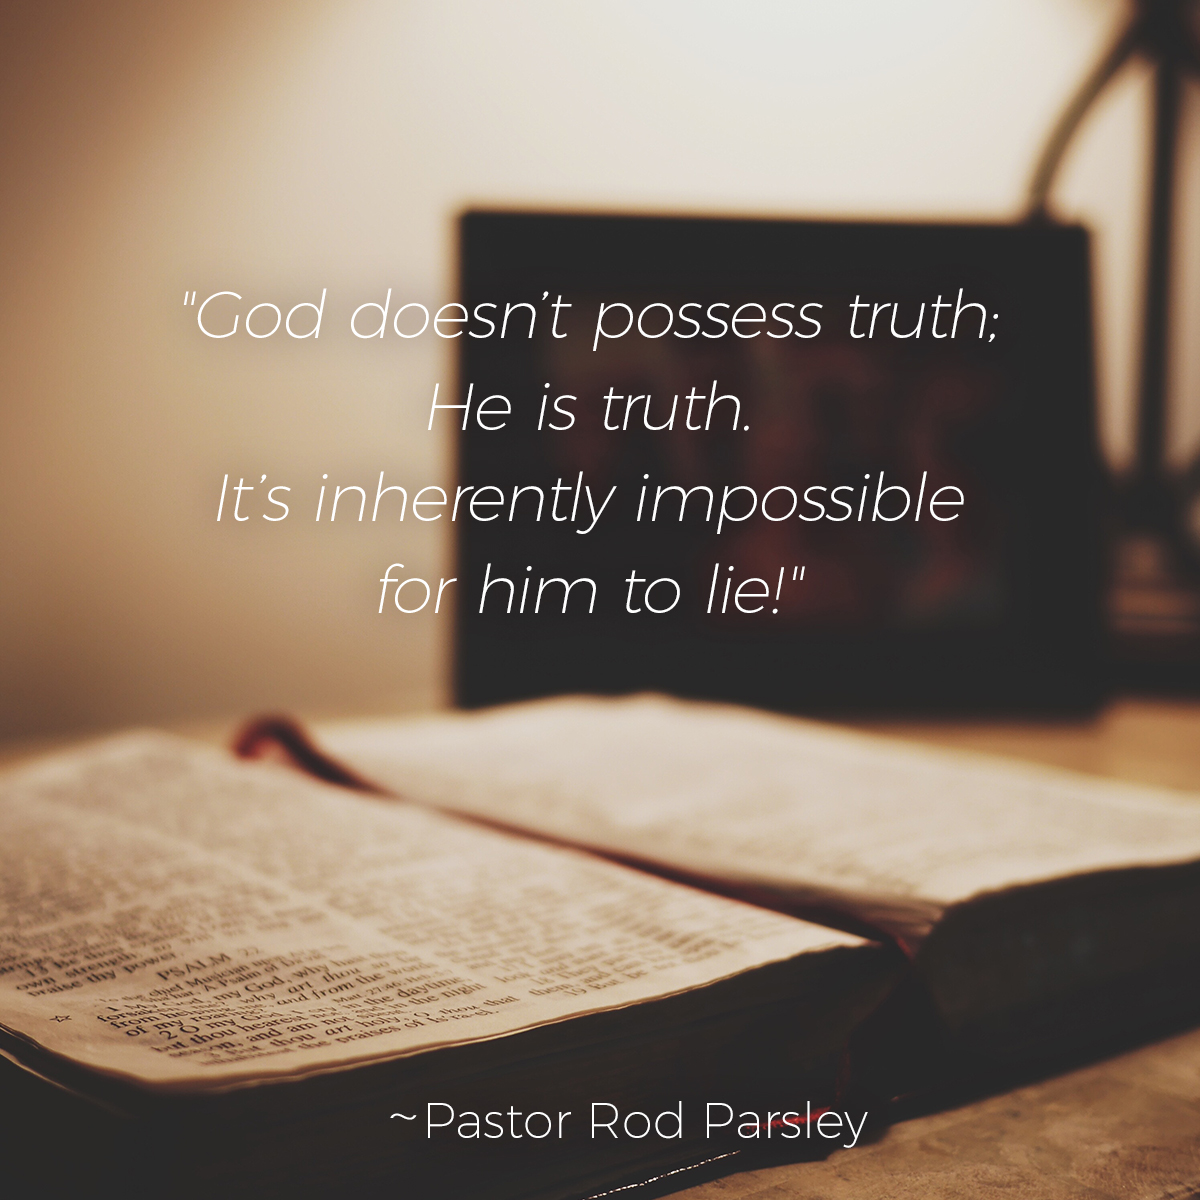 “God doesn’t possess truth; He is truth. It’s inherently impossible for him to lie!” – Pastor Rod Parsley